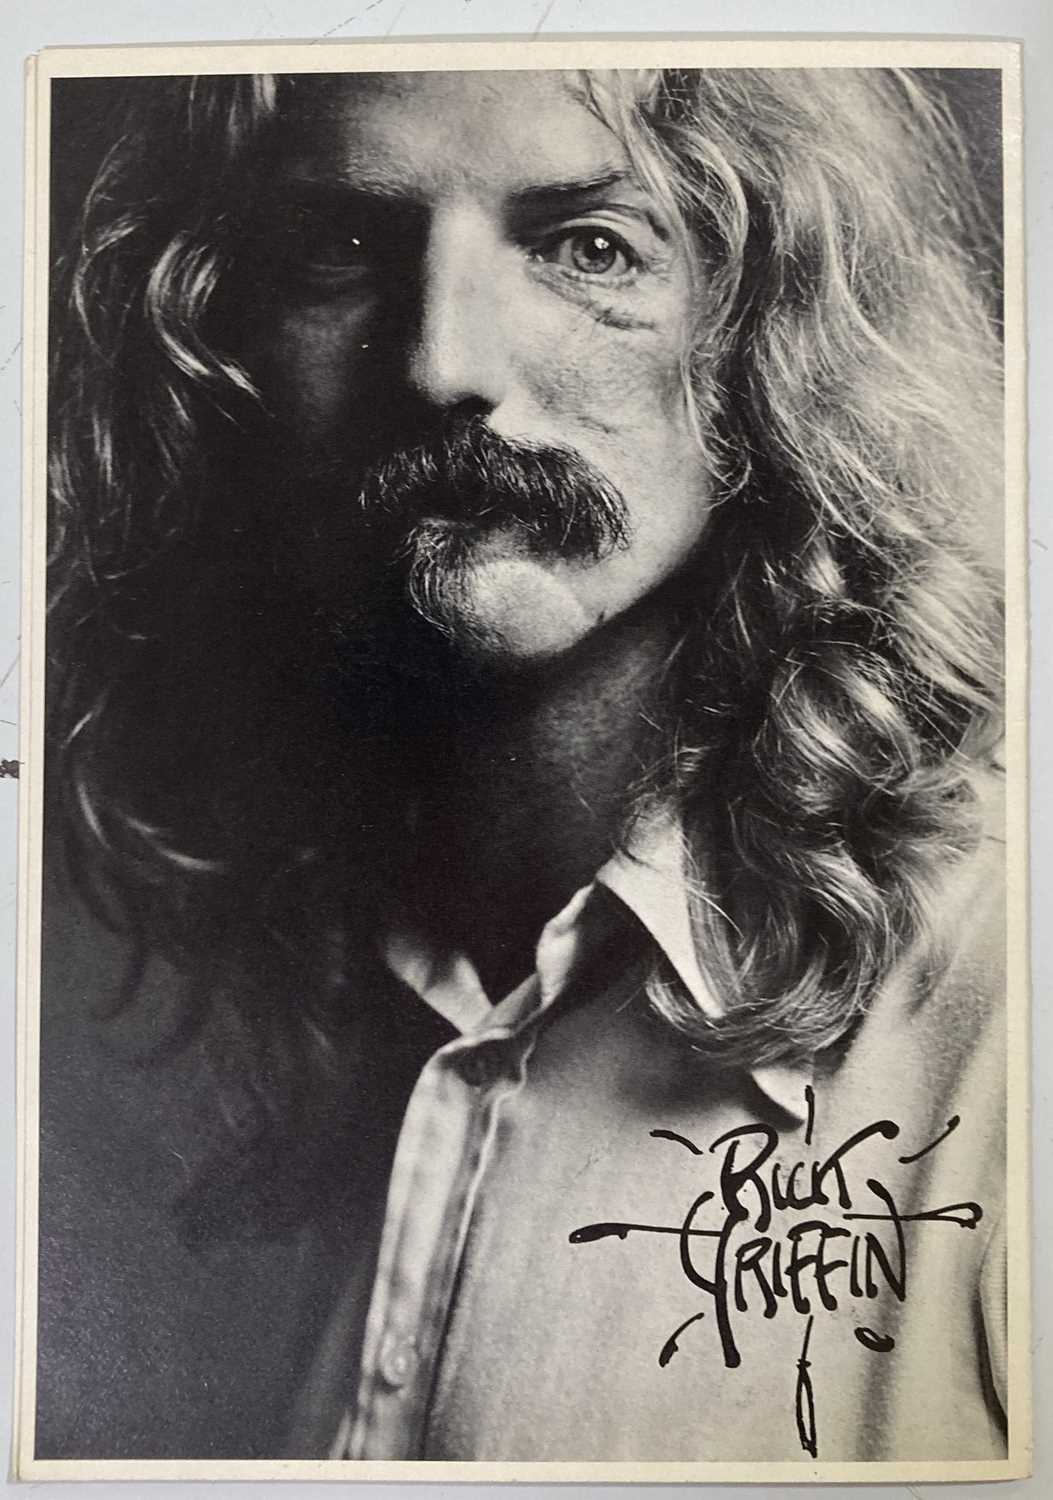 RICK GRIFFIN - 1976 CANNABIS POSTER. - Image 9 of 10